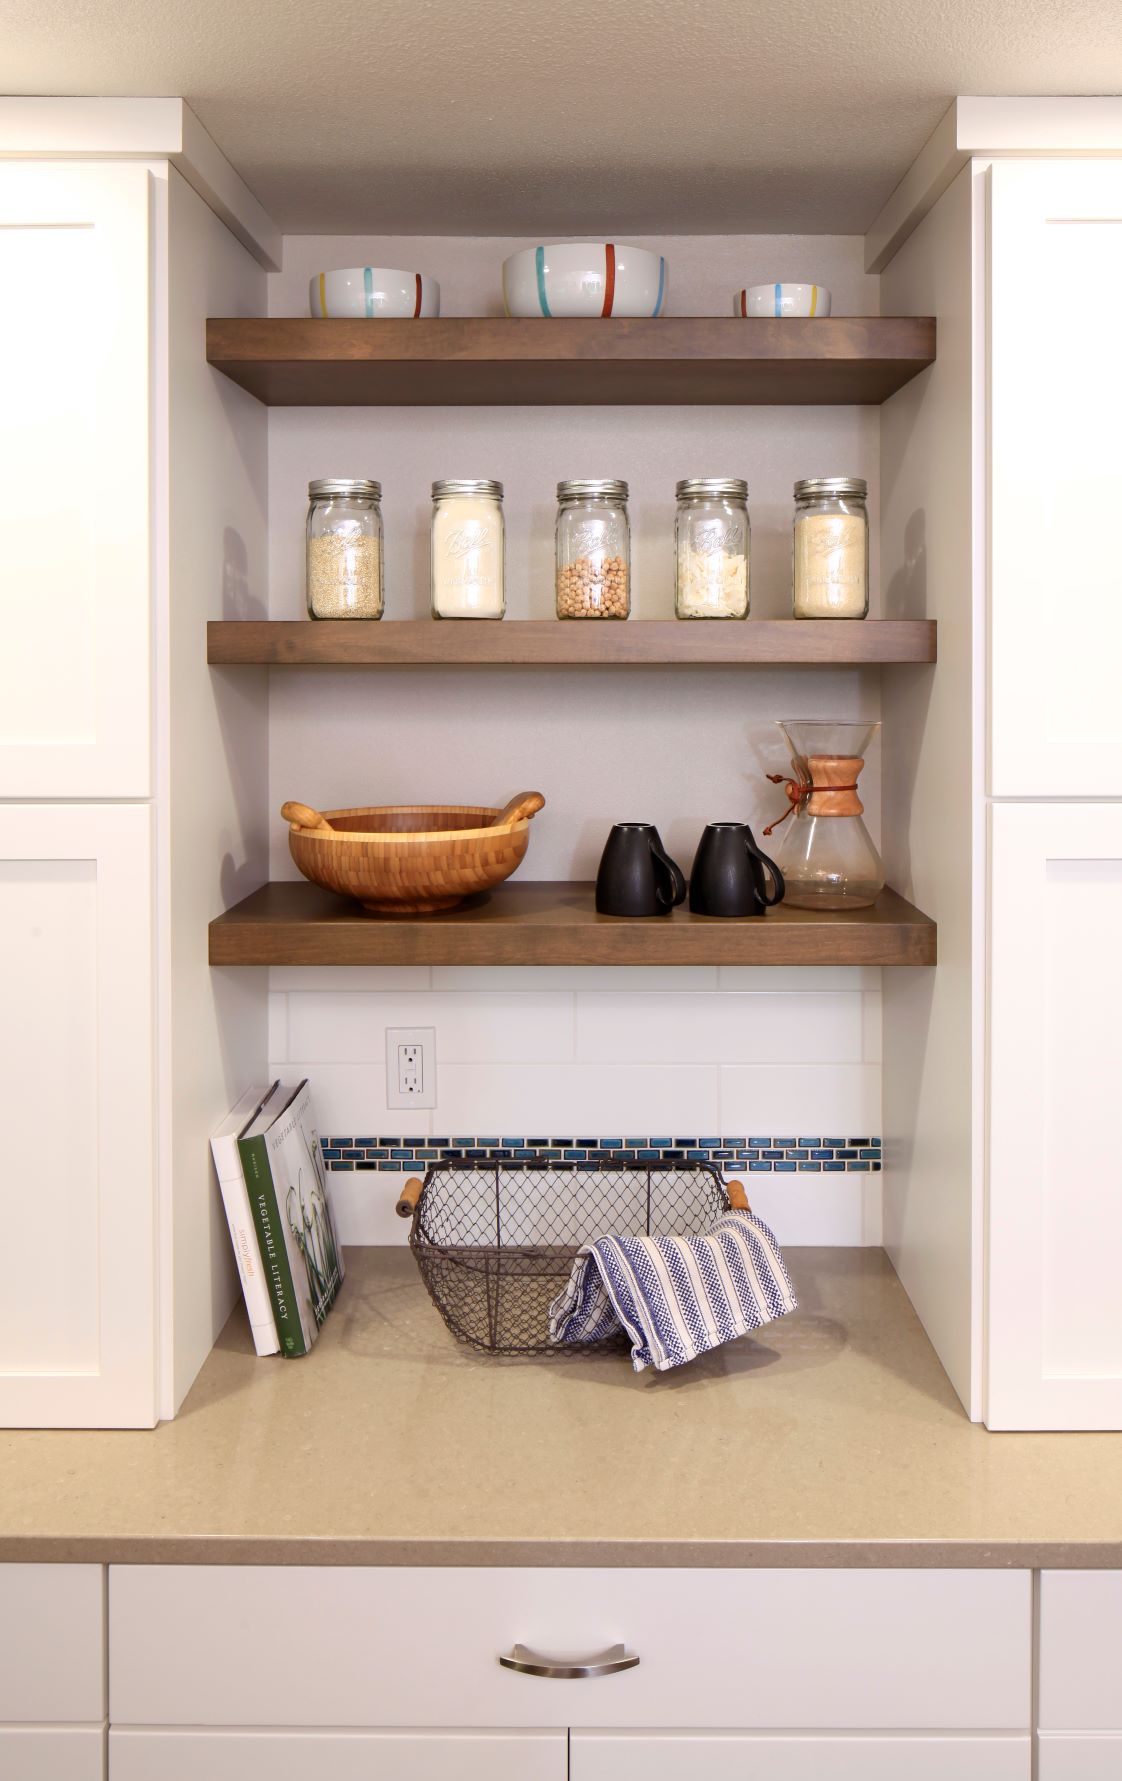 Open shelves create an airy contemporary feel in this kitchen remodel.